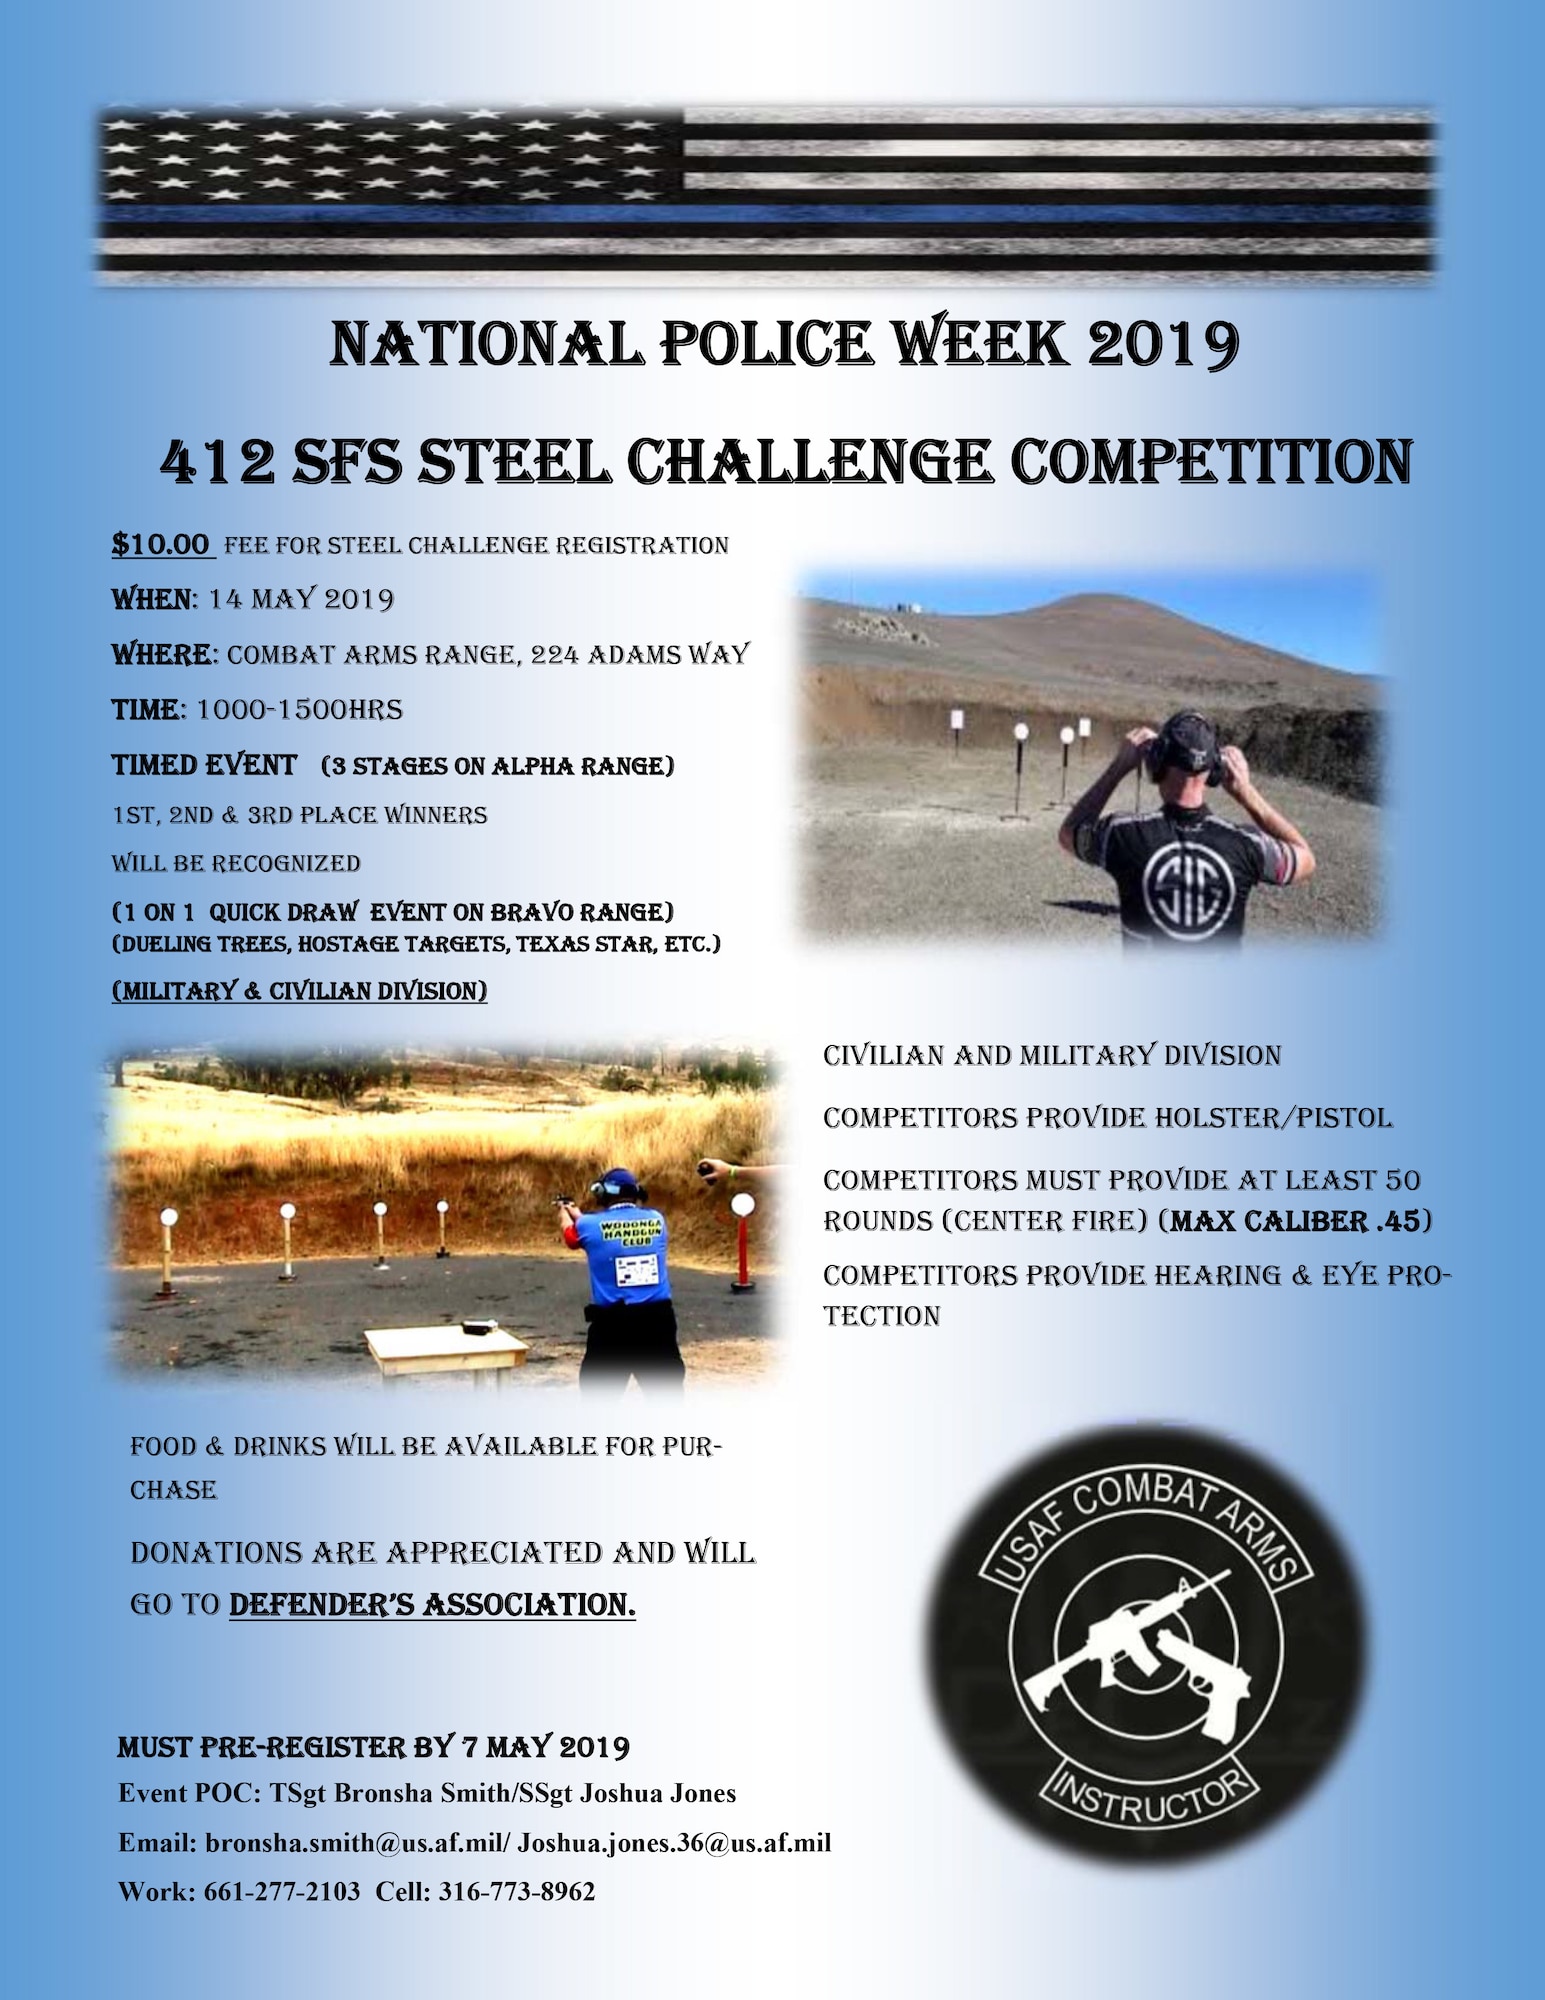 Police Week 2019, 412SFS Steel Challenge Competition